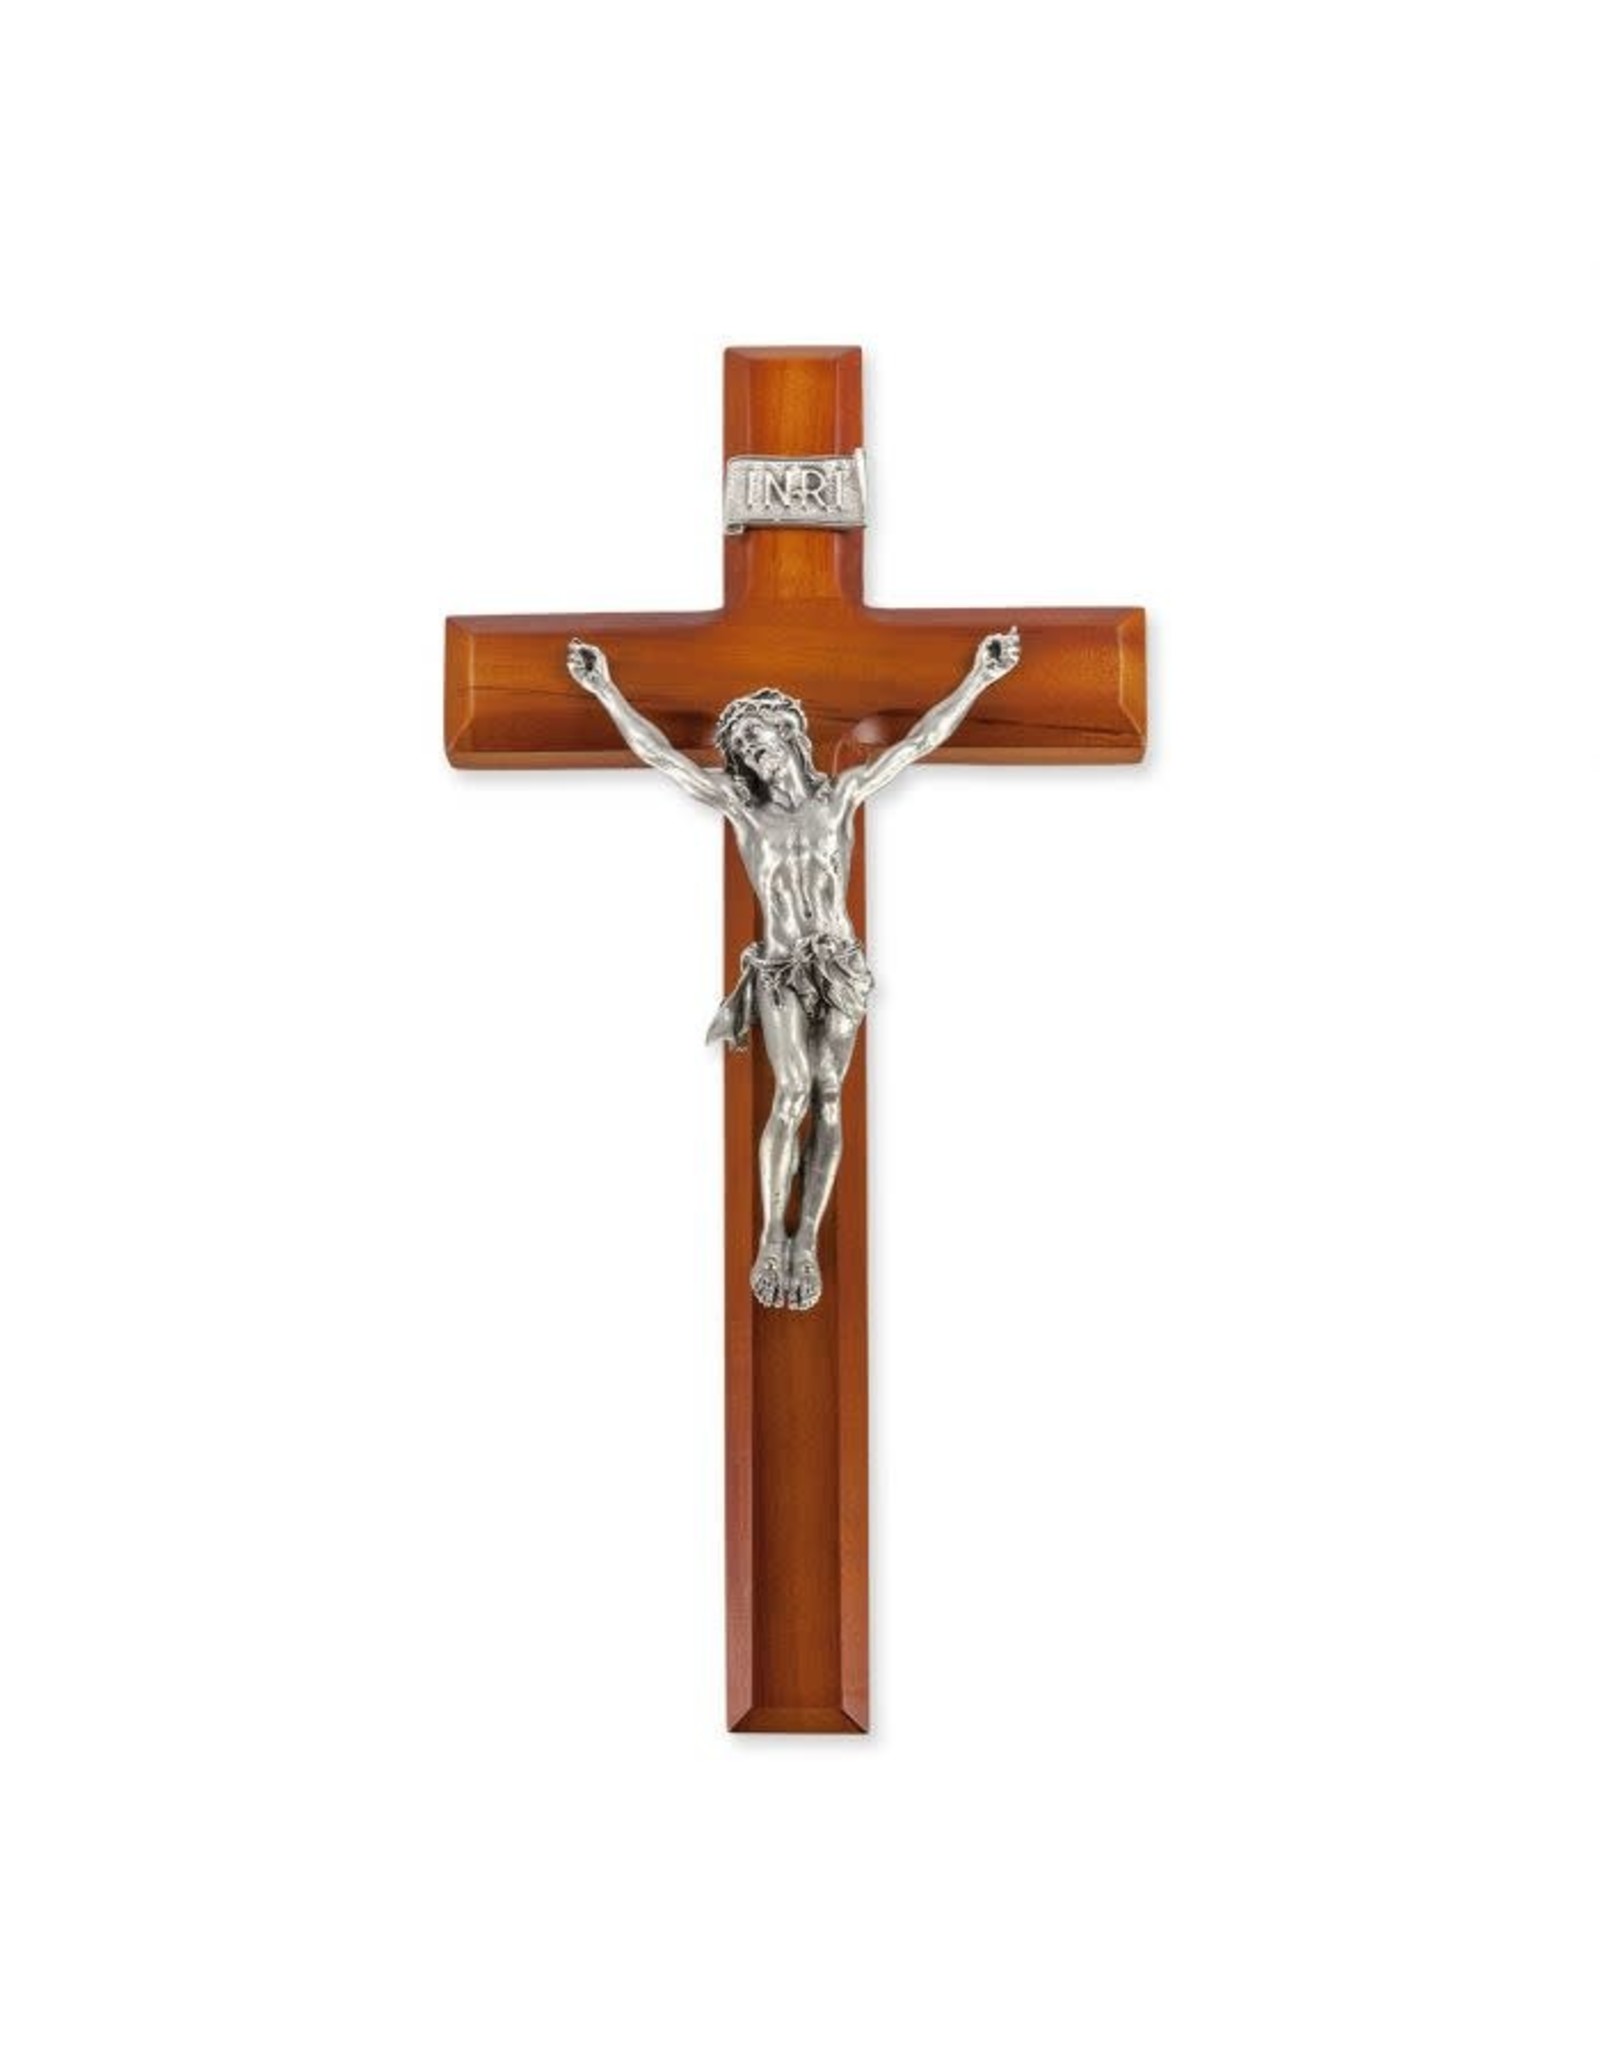 Crucifix, Wood, with Pewter Corpus, 12"